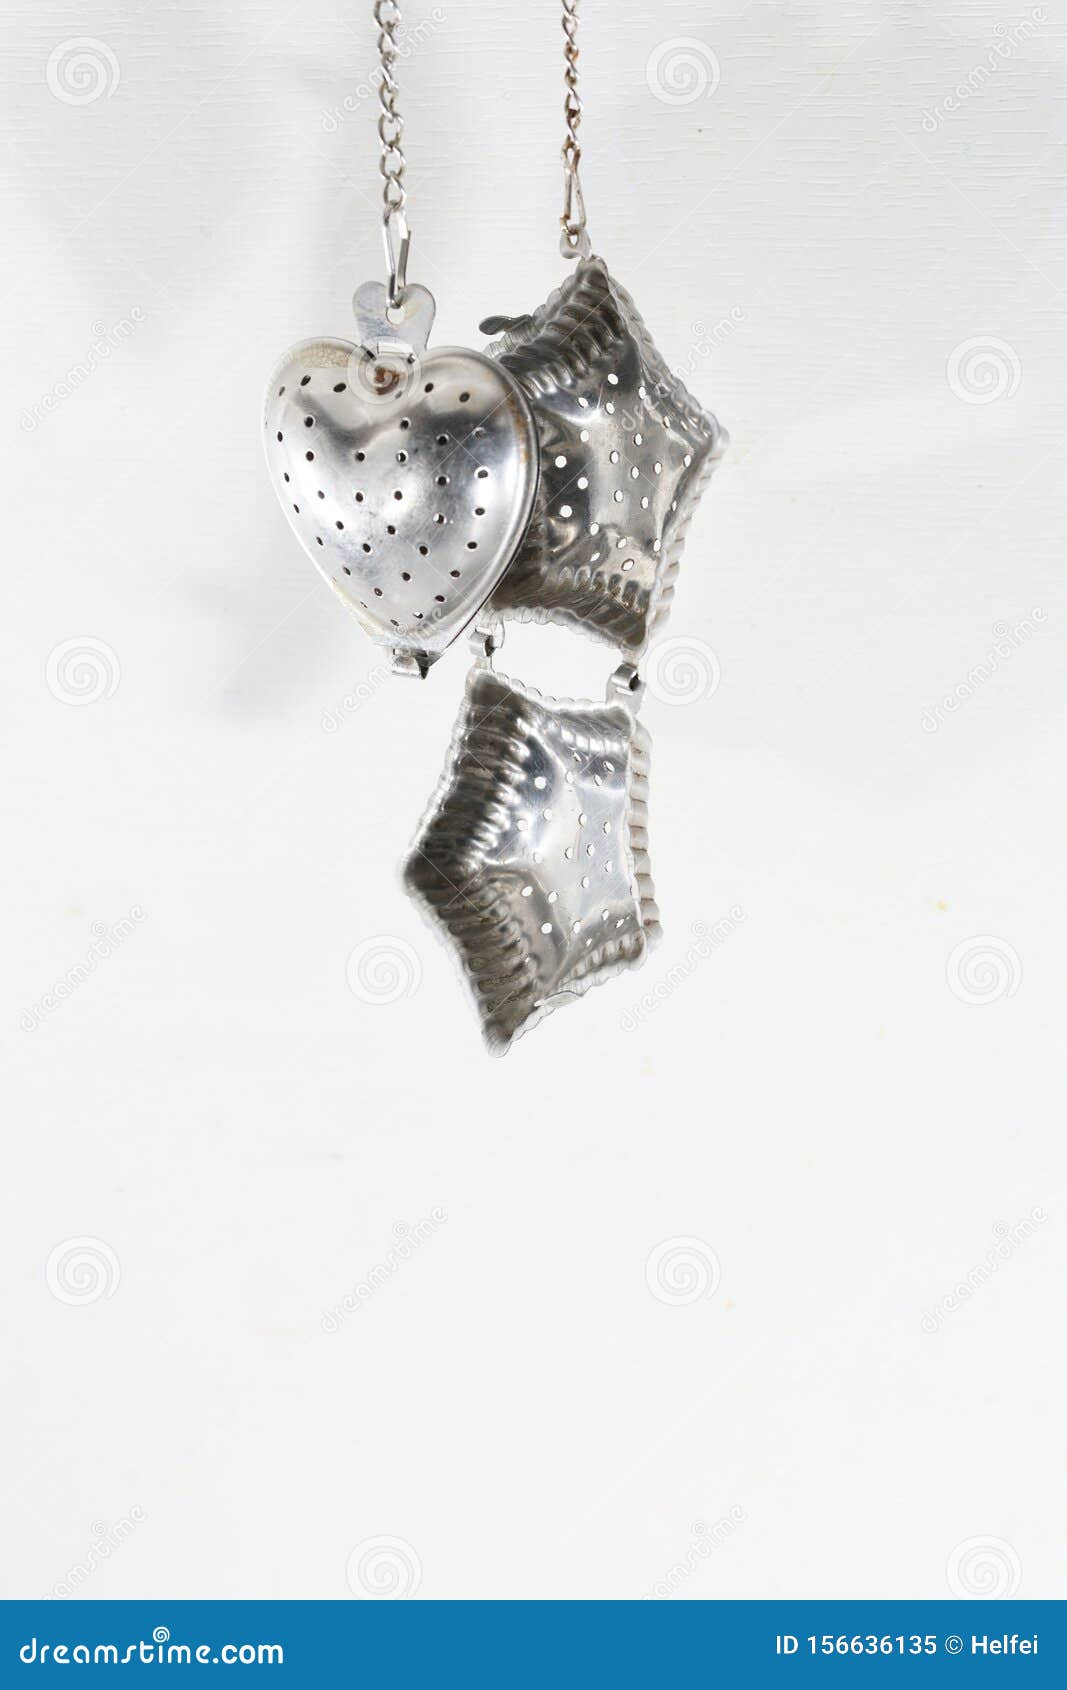 tea strainer is indispensable in the kitchen for the preparation of fresh tea